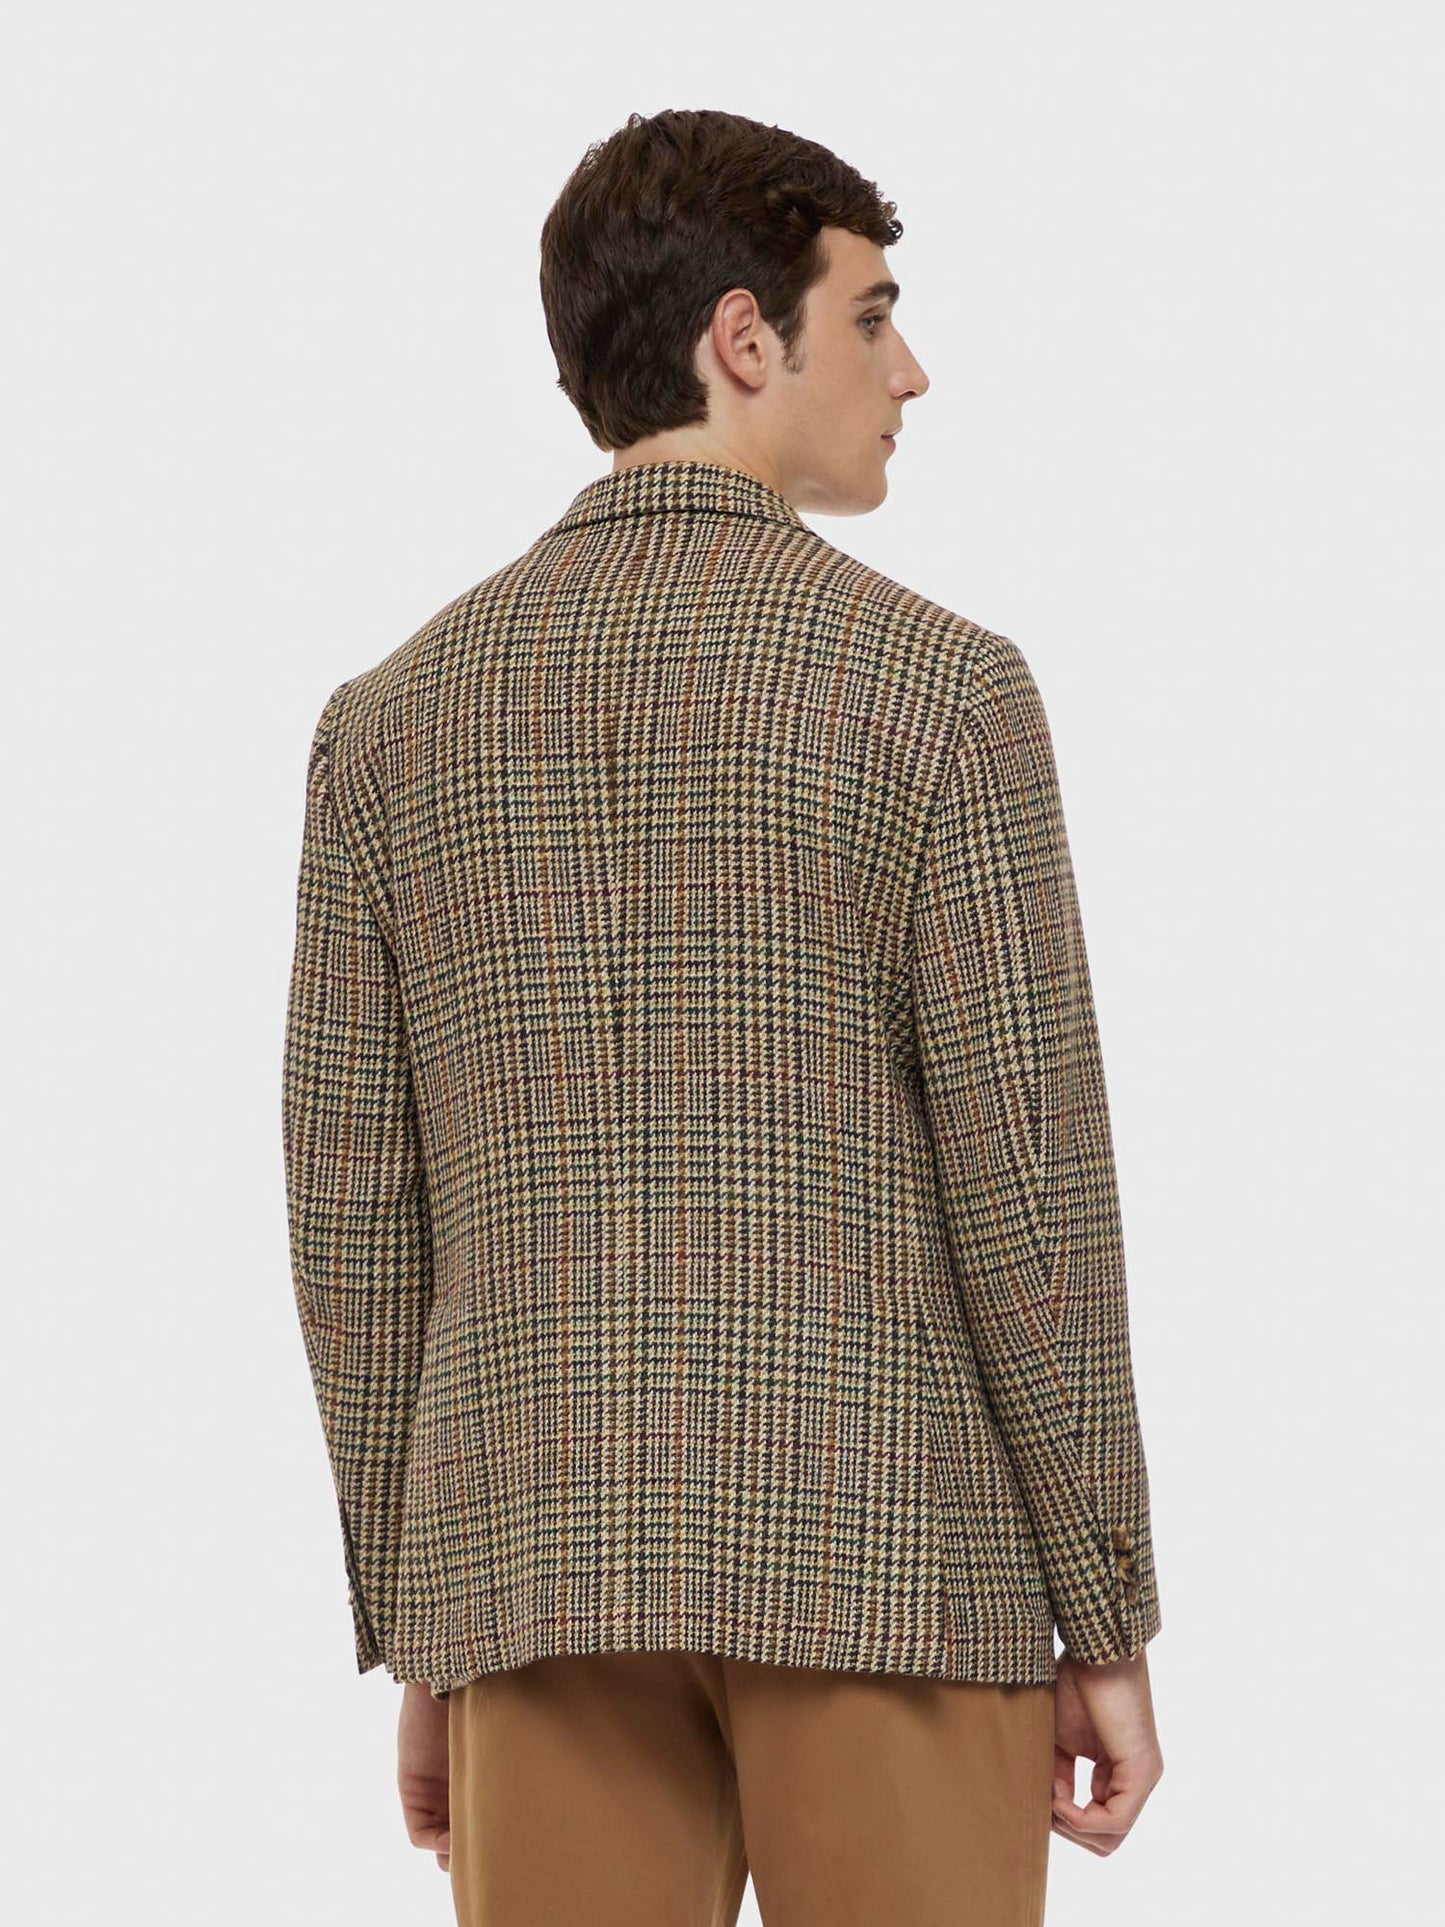 Butterfly jacket in brown prince of wales wool